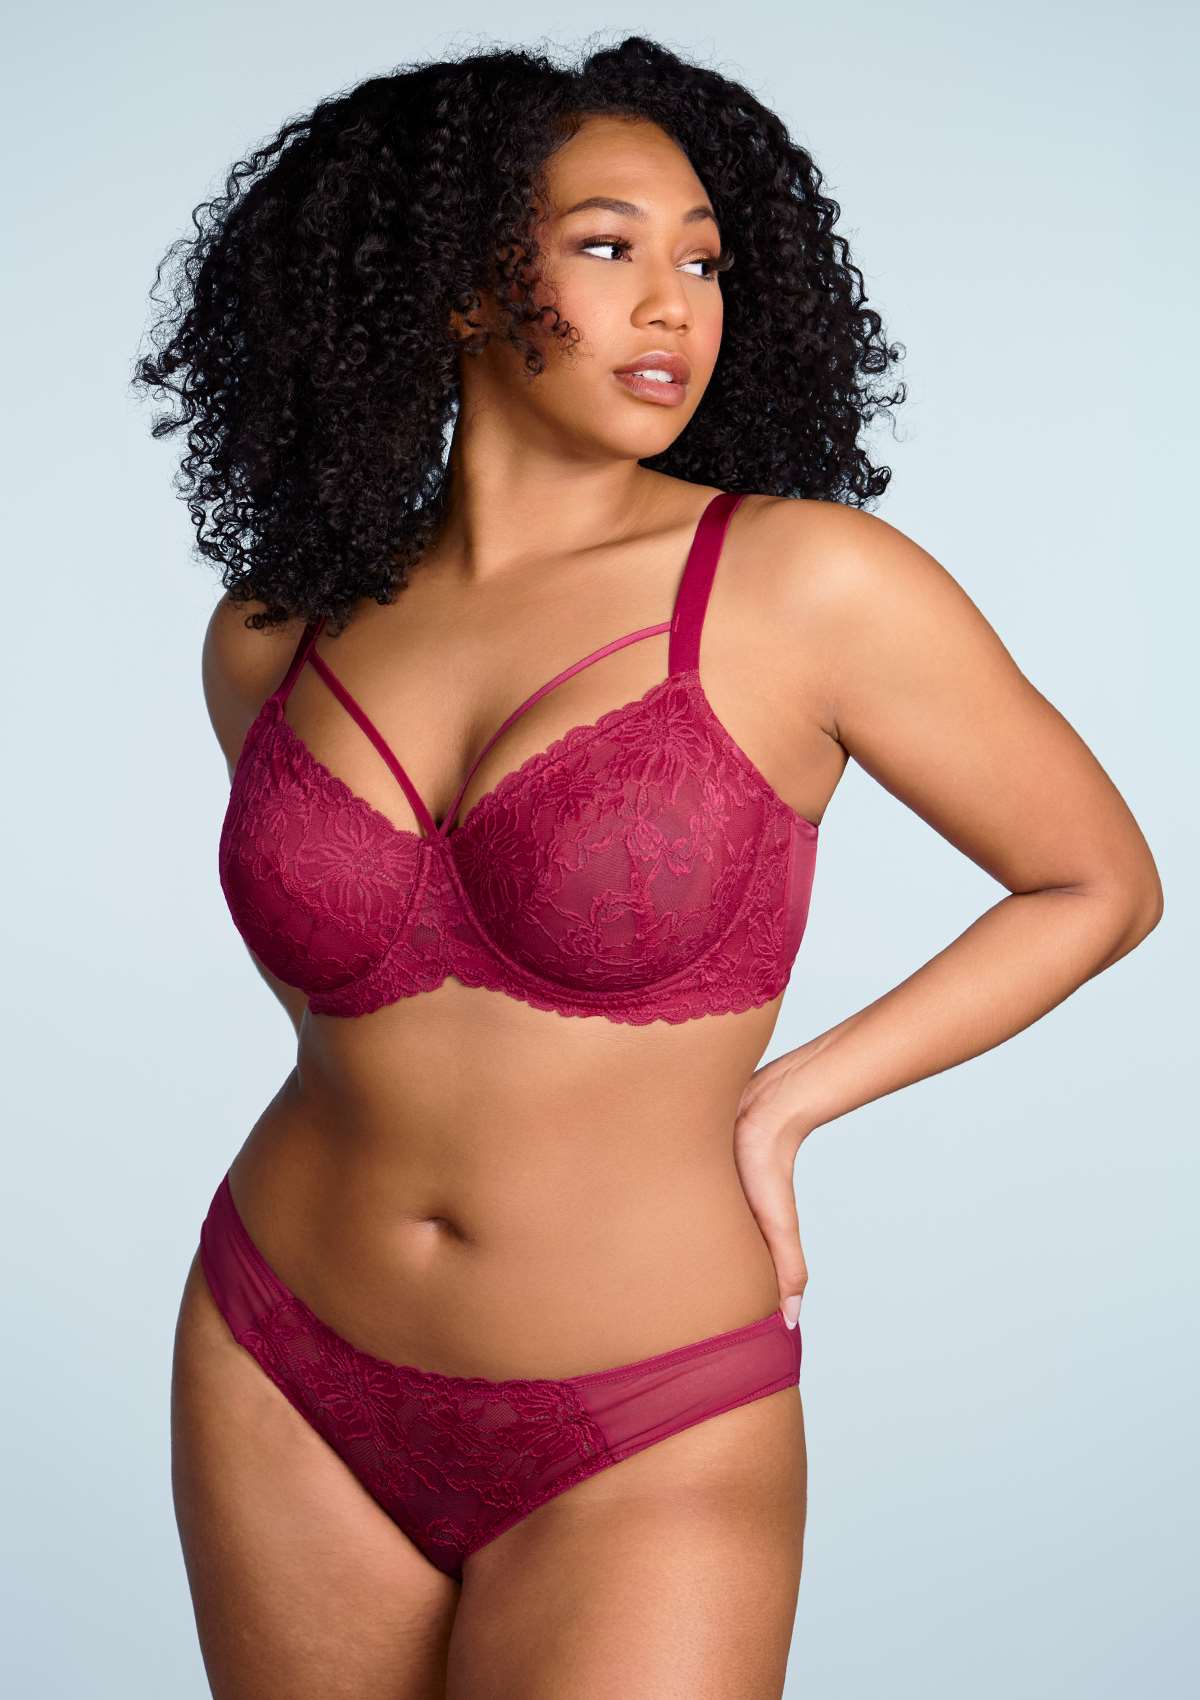 HSIA Pretty In Petals Lace Panties And Bra Set: Plus Size Women Bra - Red / 32 / D